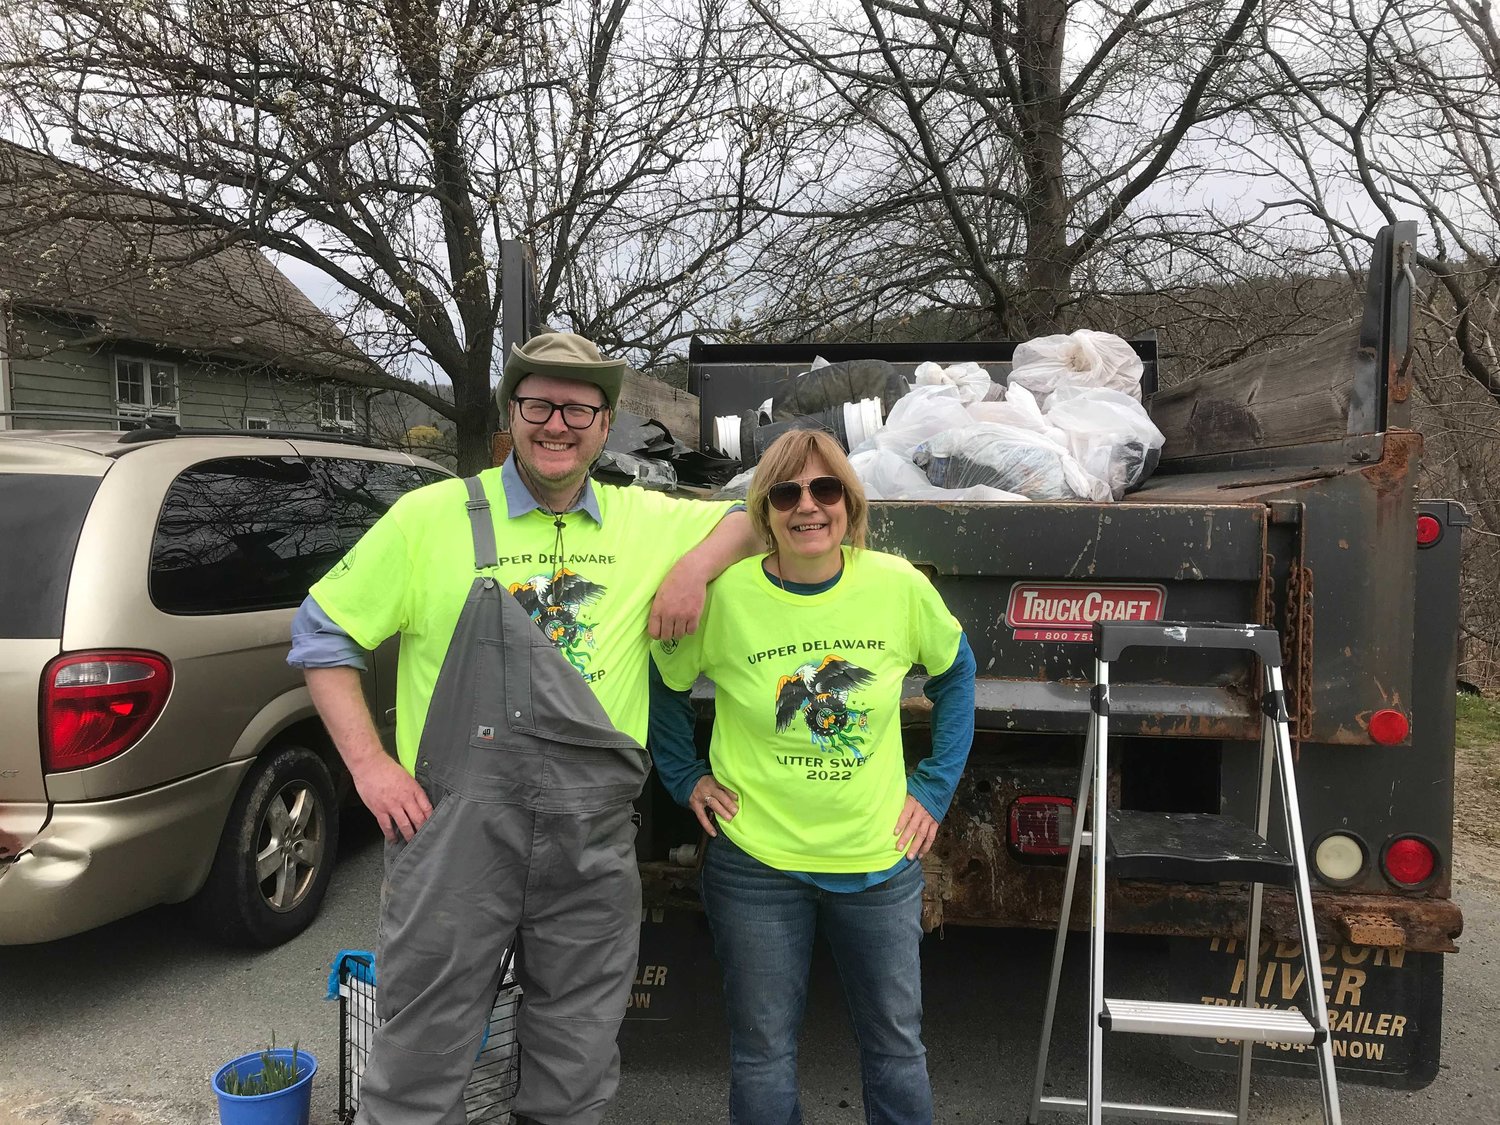 Alan Carroll from Sullivan Renaissance, left, and Wendy from the Narrowsburg Beautification Group pose before a truck of collected trash at the Tusten chapter of the Upper Delaware Council's 2022 Upper Delaware Litter Sweep.